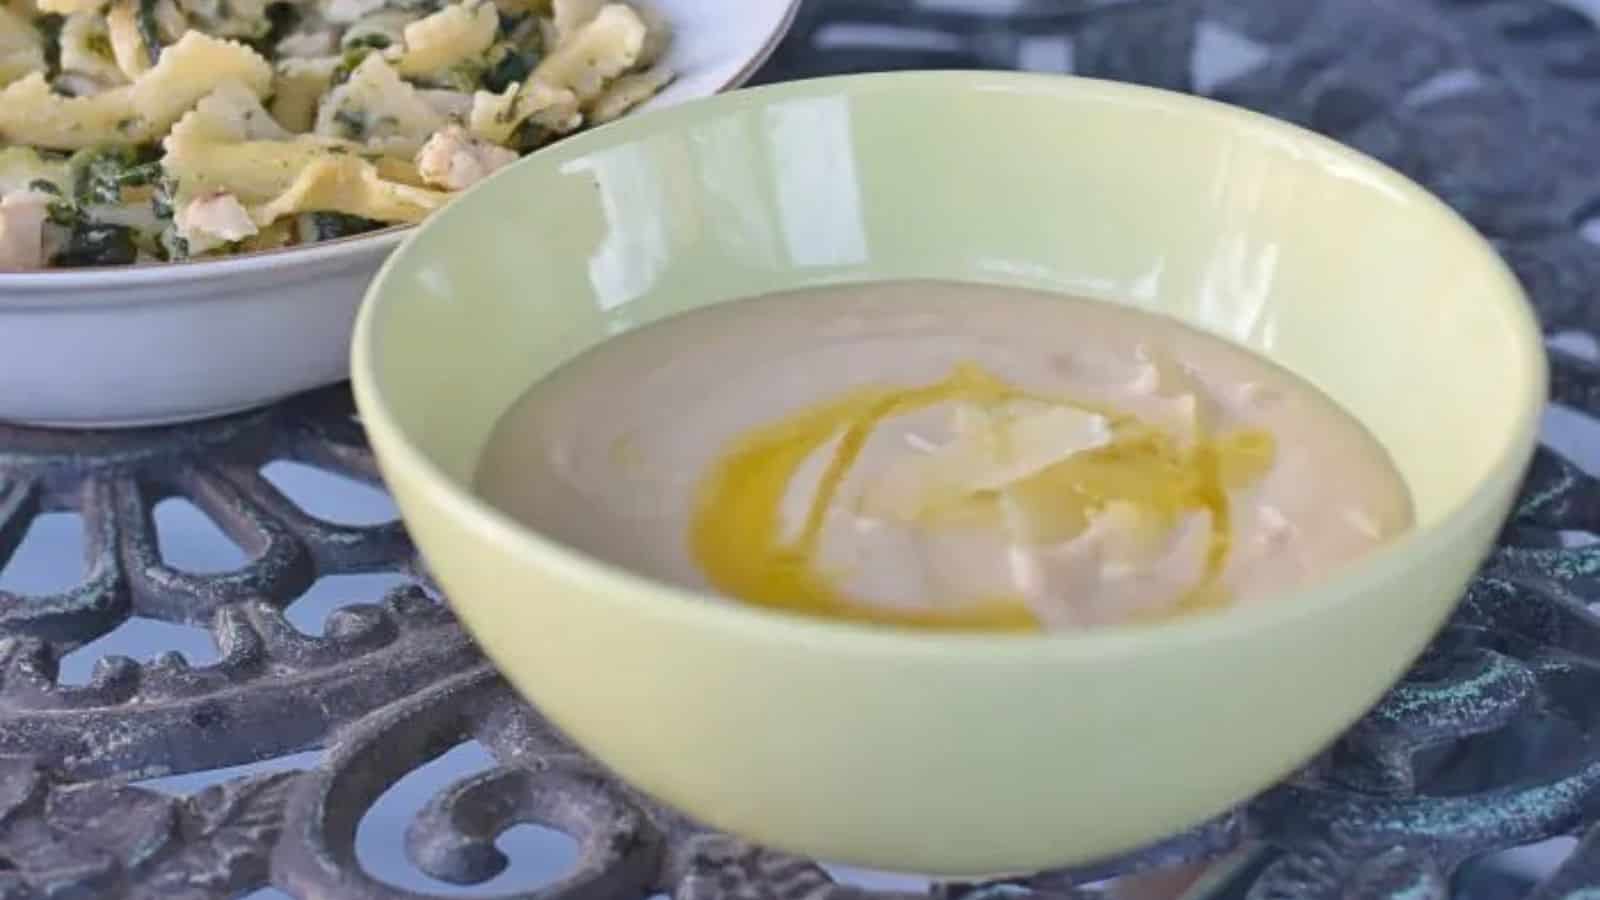 Image shows a bowl of Creamy Tuscan Bean Soup with a drizzle of olive oil in a green bowl.